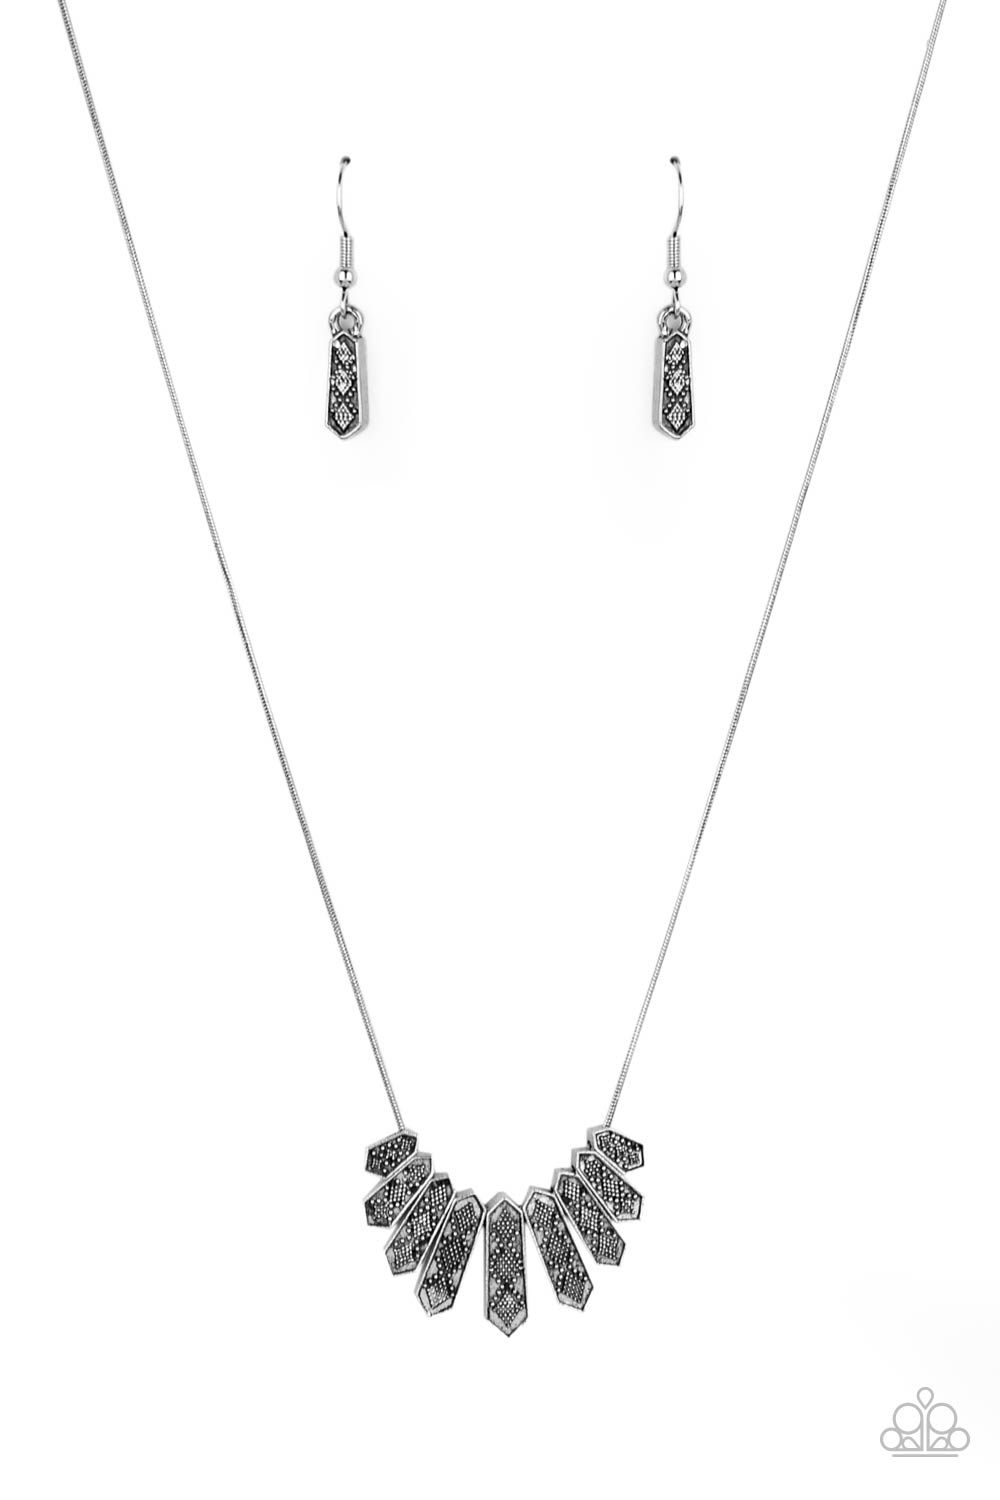 Monumental March Paparazzi Accessories Necklace with Earrings Silver